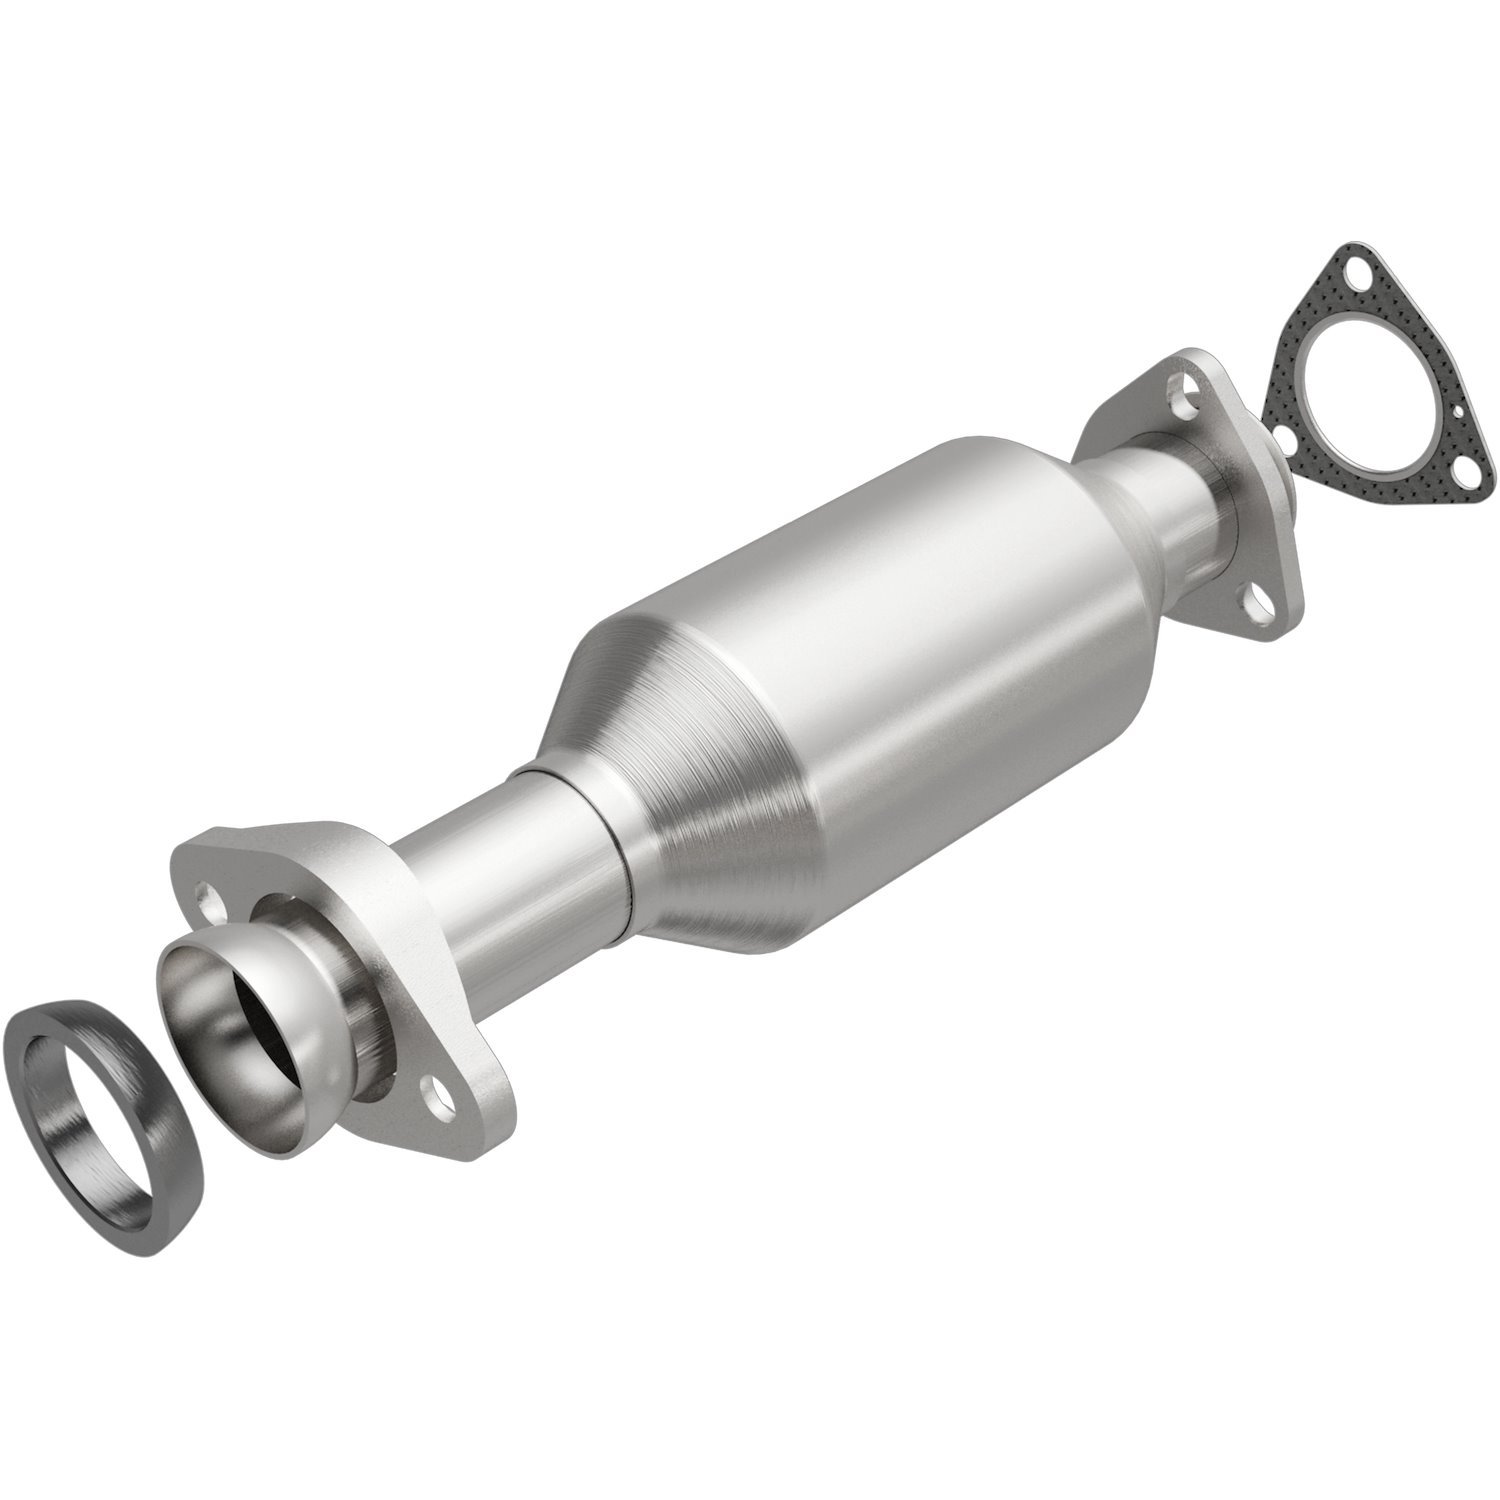 California Grade CARB Compliant Direct-Fit Catalytic Converter 3322635